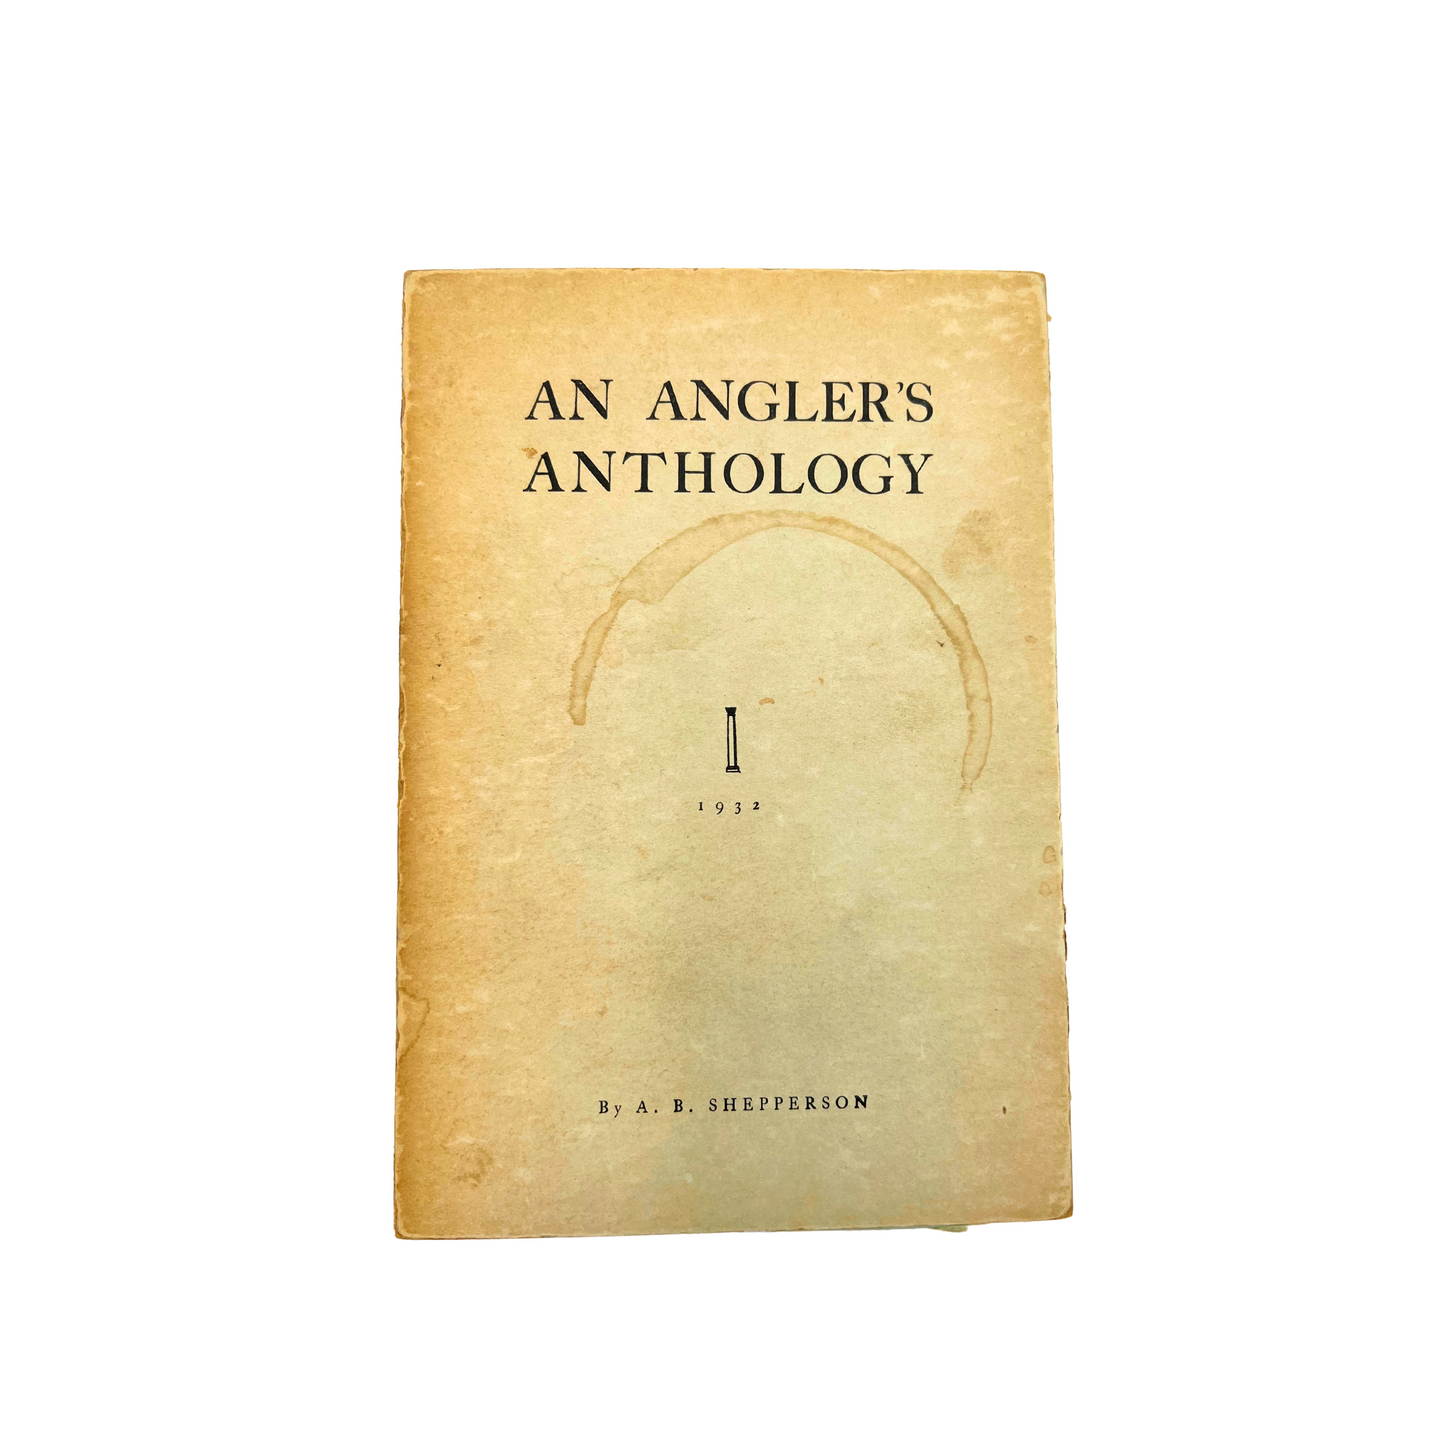 1932 book: An Angler's Anthology